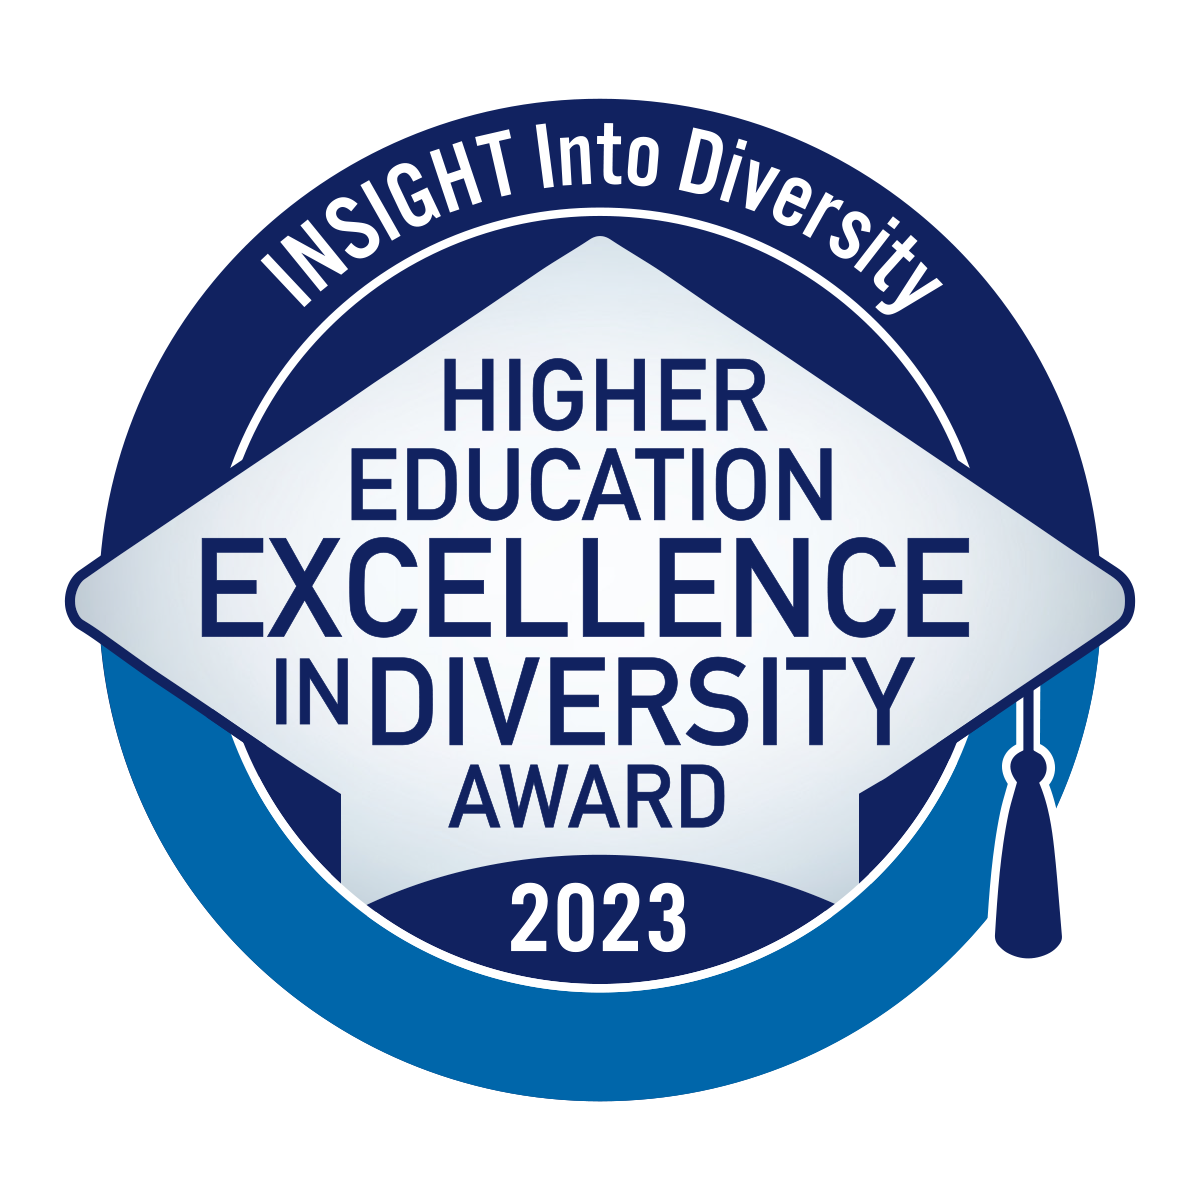 The INSIGHT Into Diversity Health Professions Higher Education Excellence in Diversity (HEED) Award 